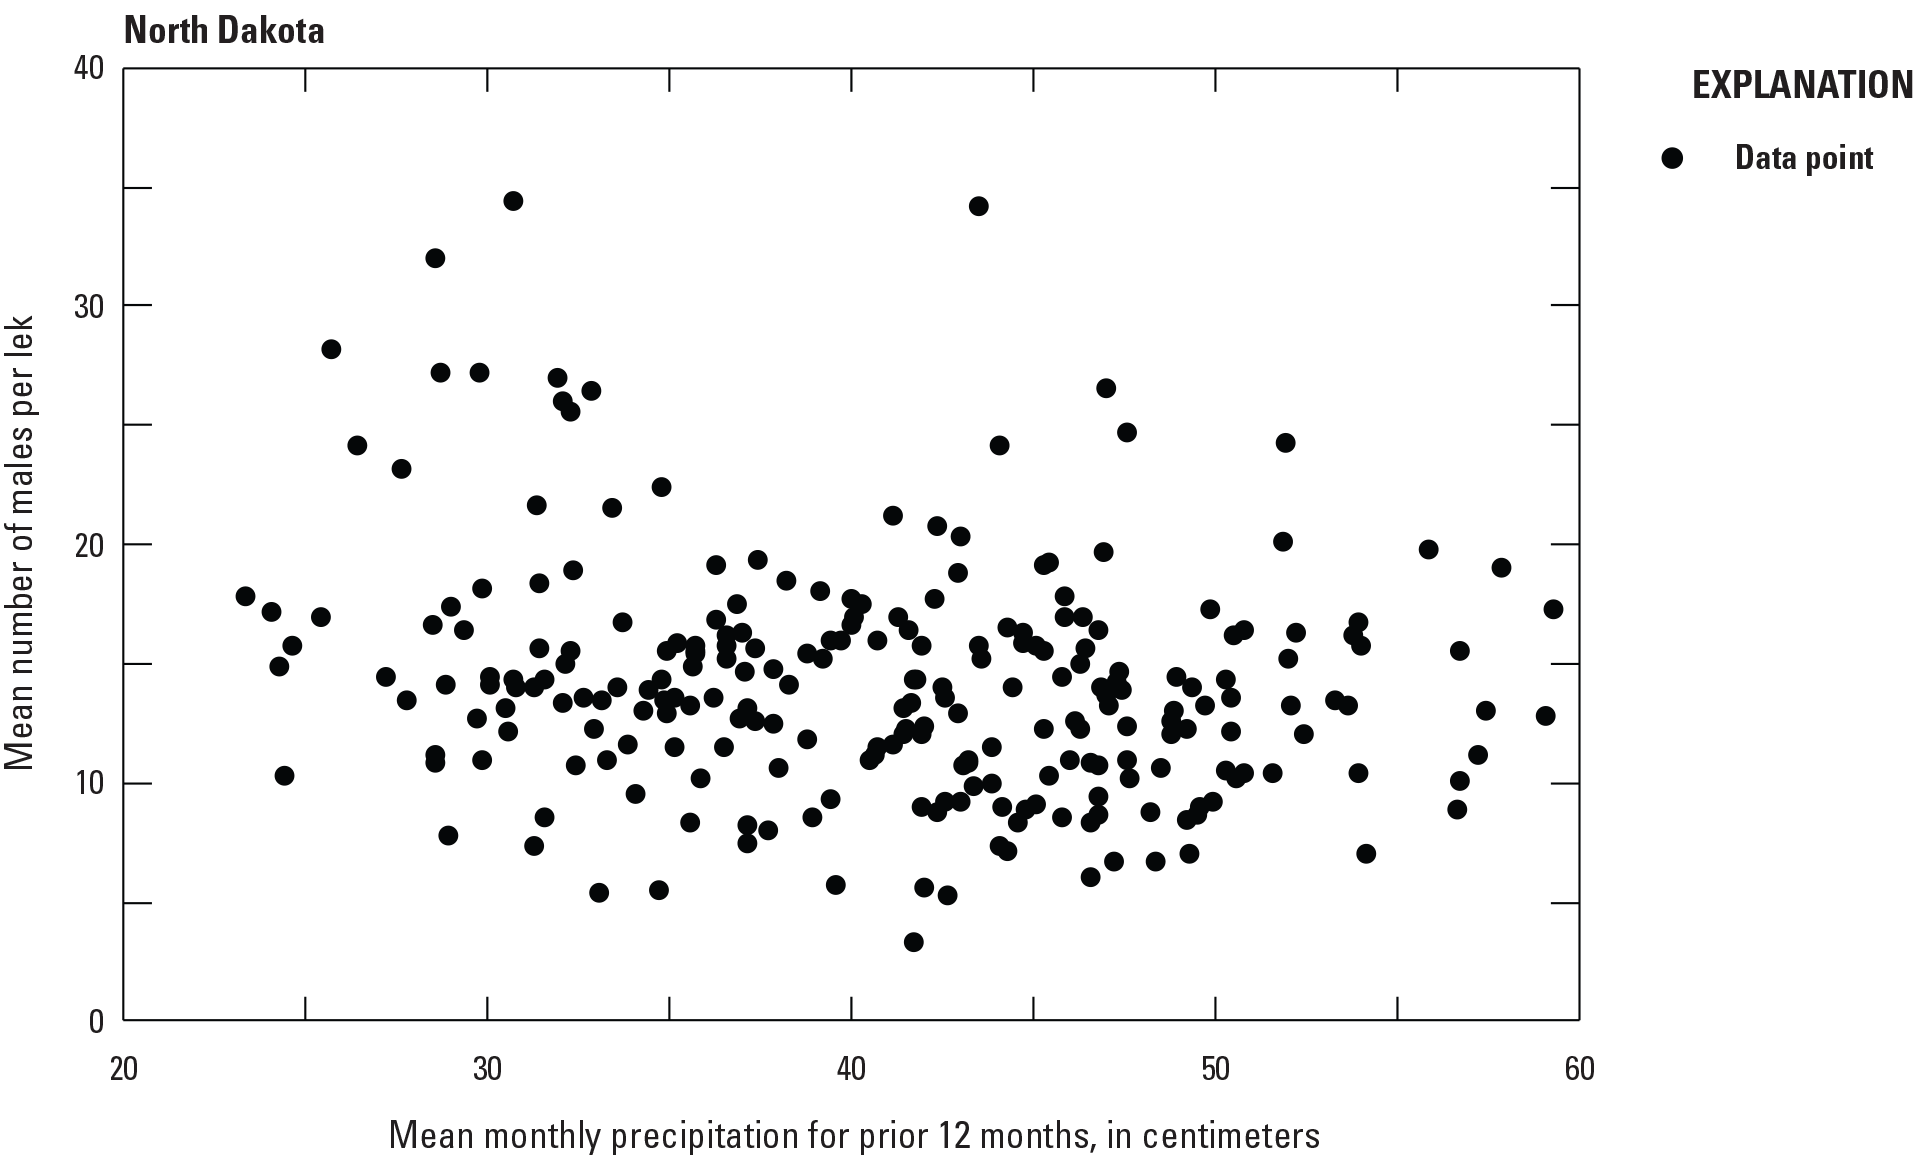 Mean number of male grouse per lek varies with increasing mean monthly precipitation